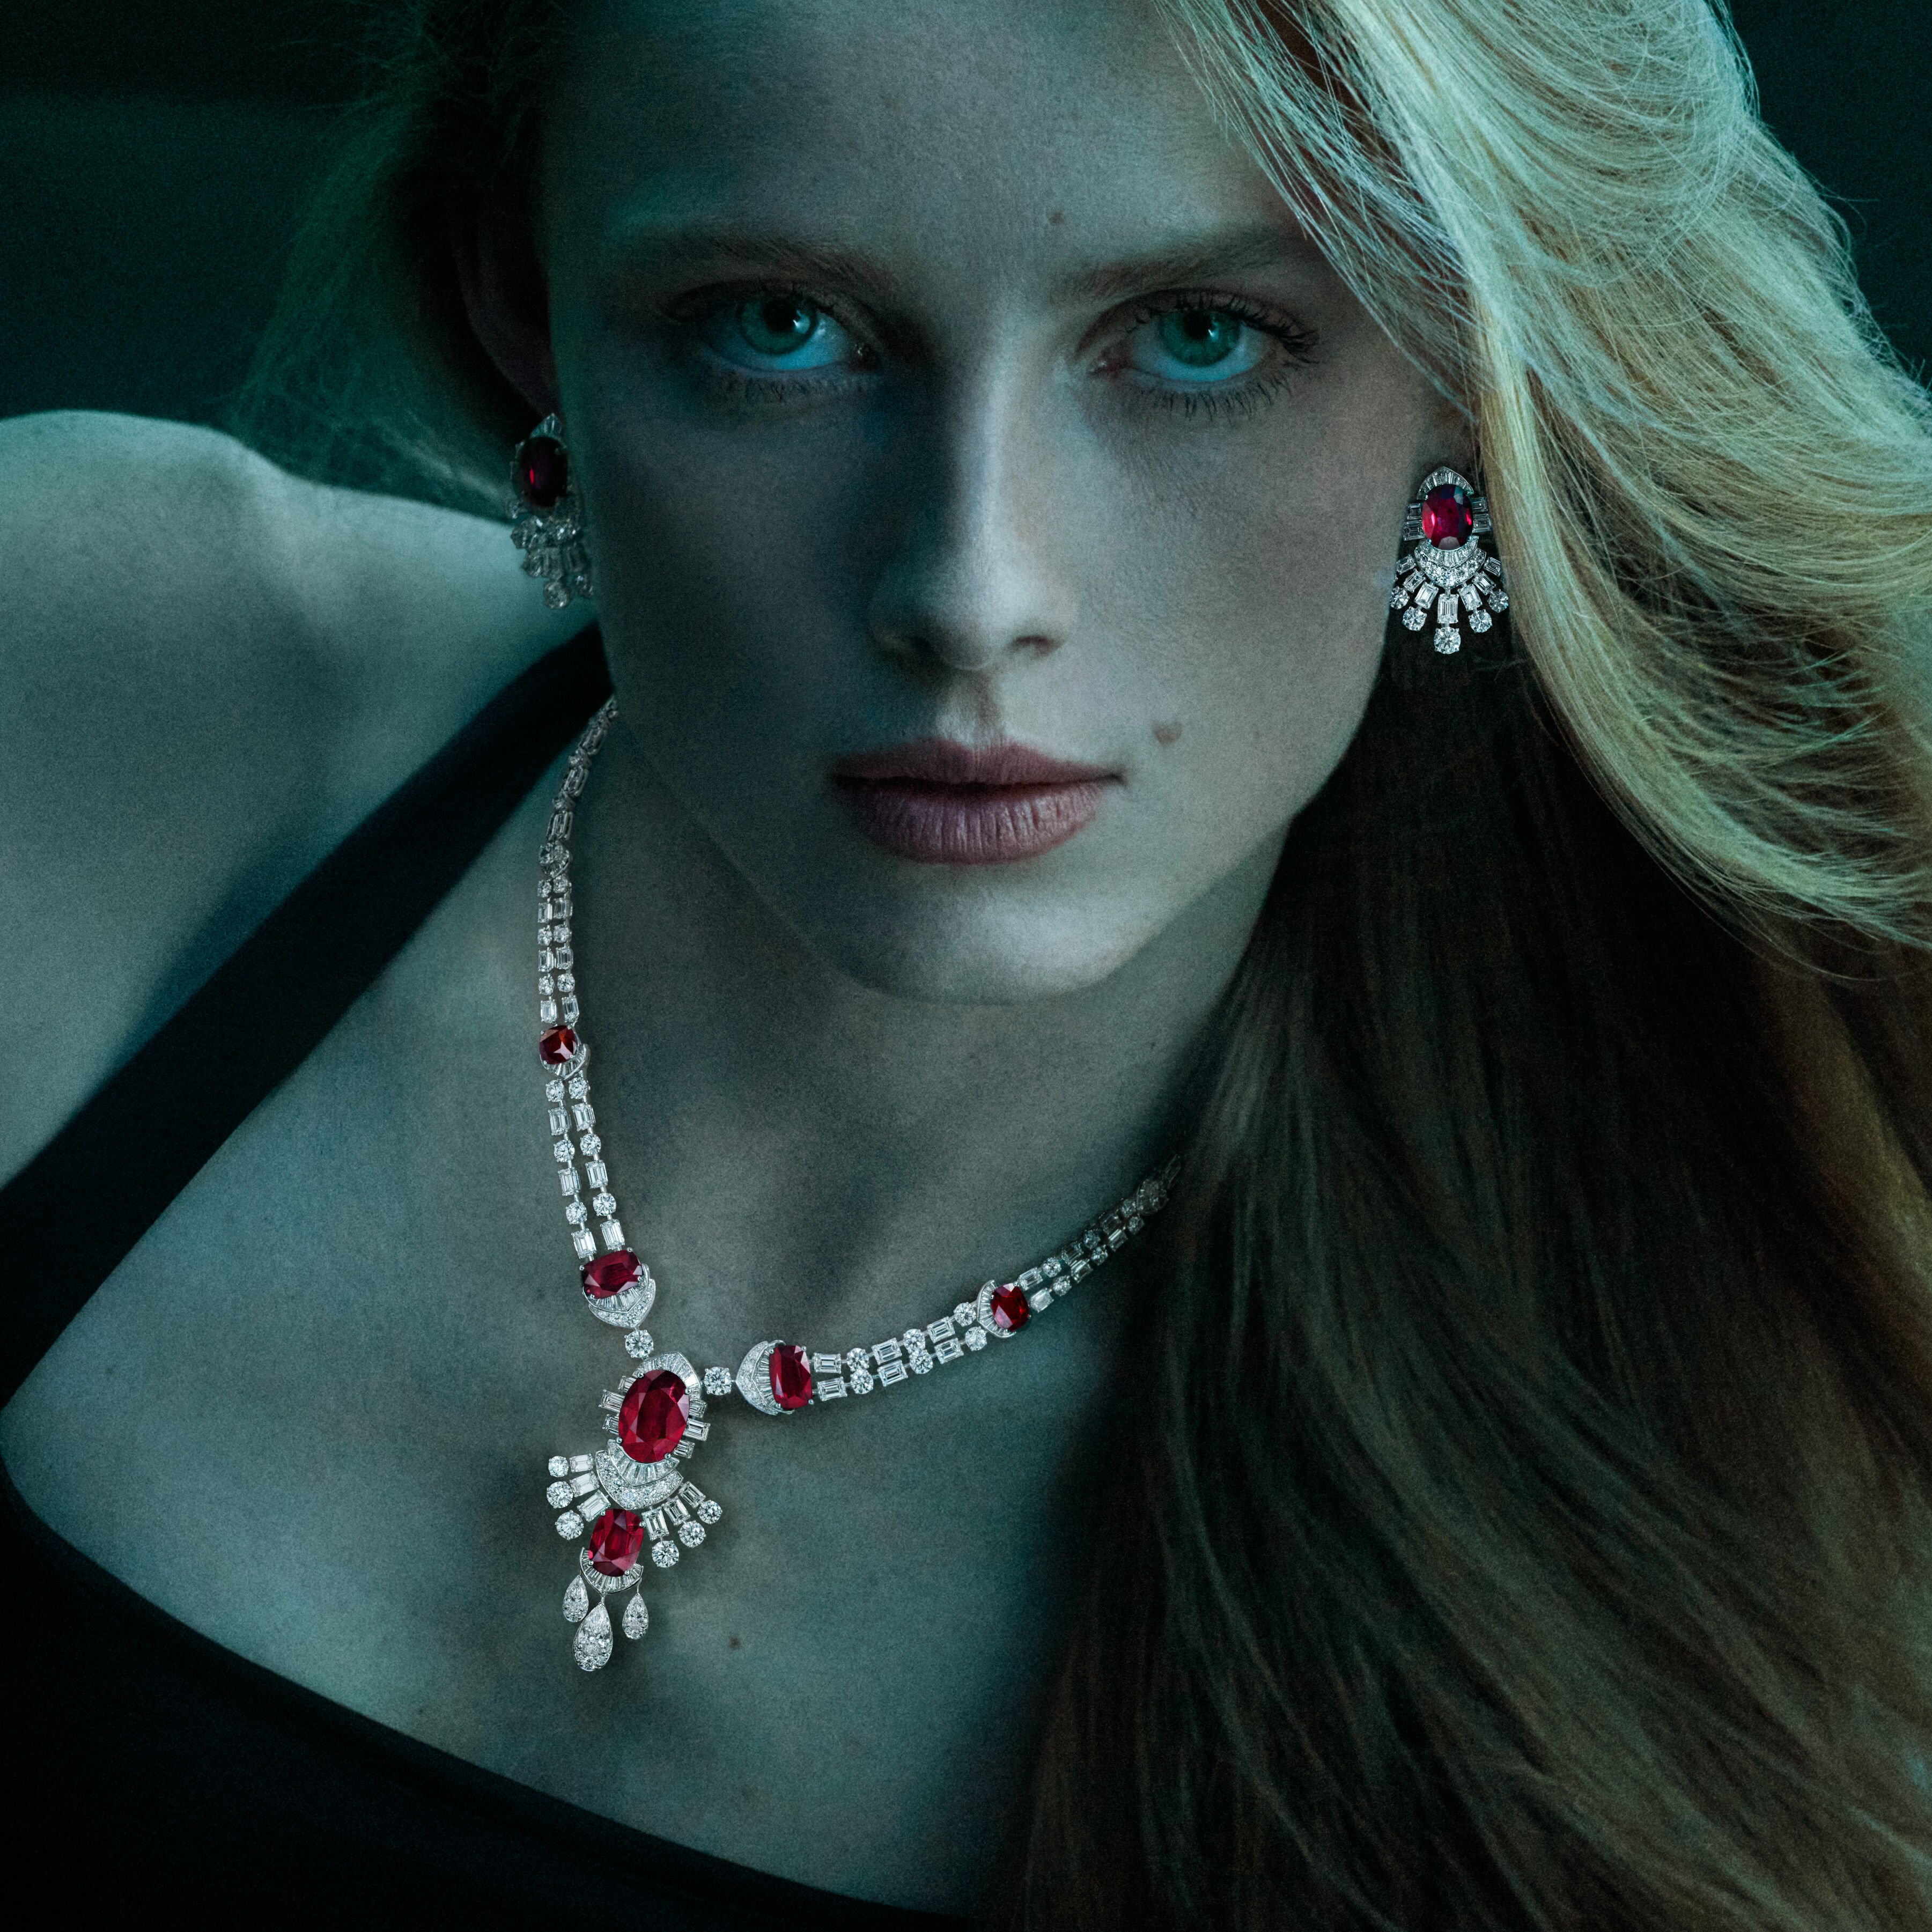 Image of model wearing Graff Galaxia Ruby and White Diamond jewellery suite